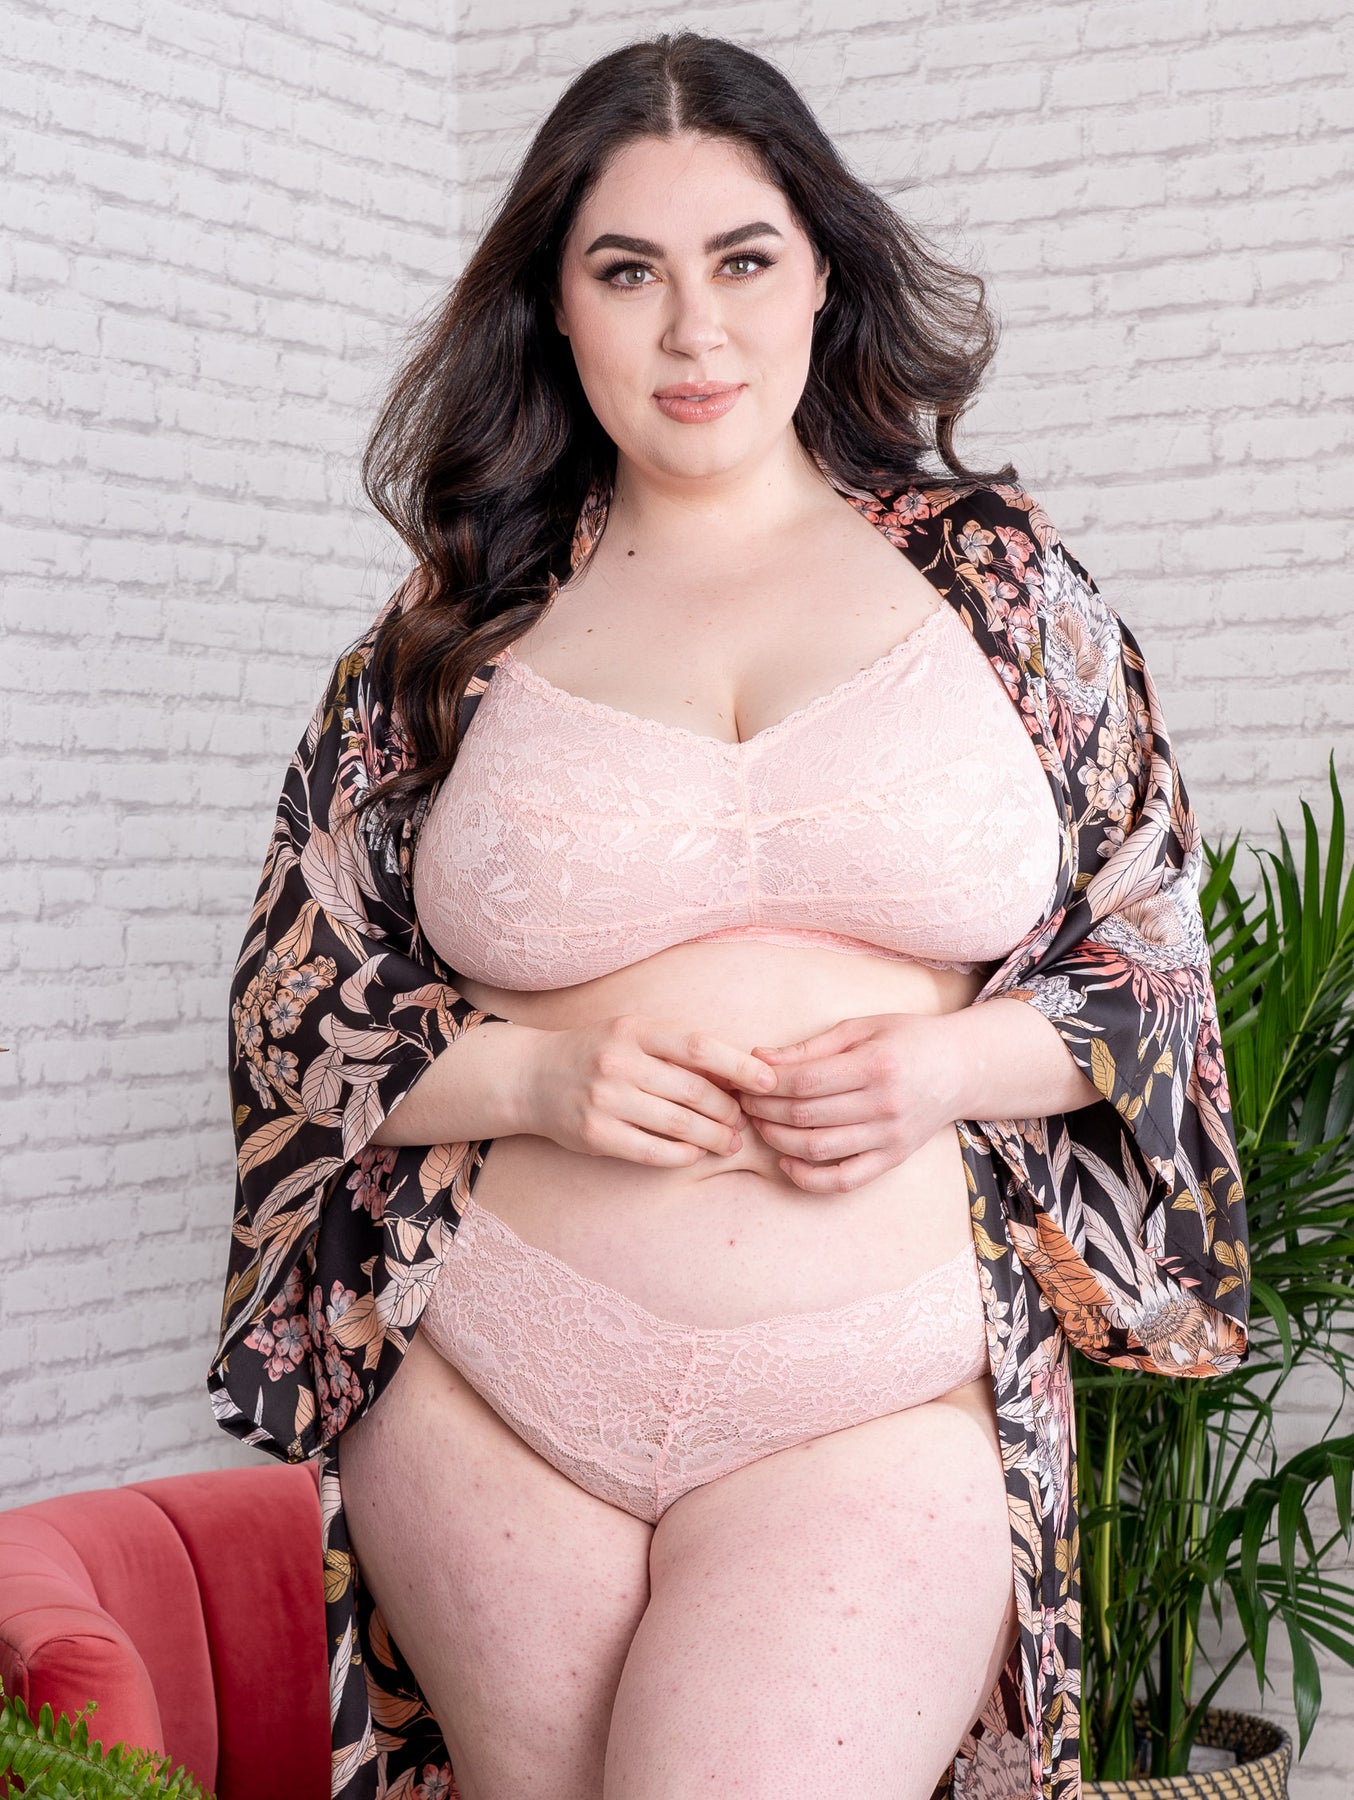 Cosabella Never Say Never Ultra Curvy Sweetie Bralette NEVER1321